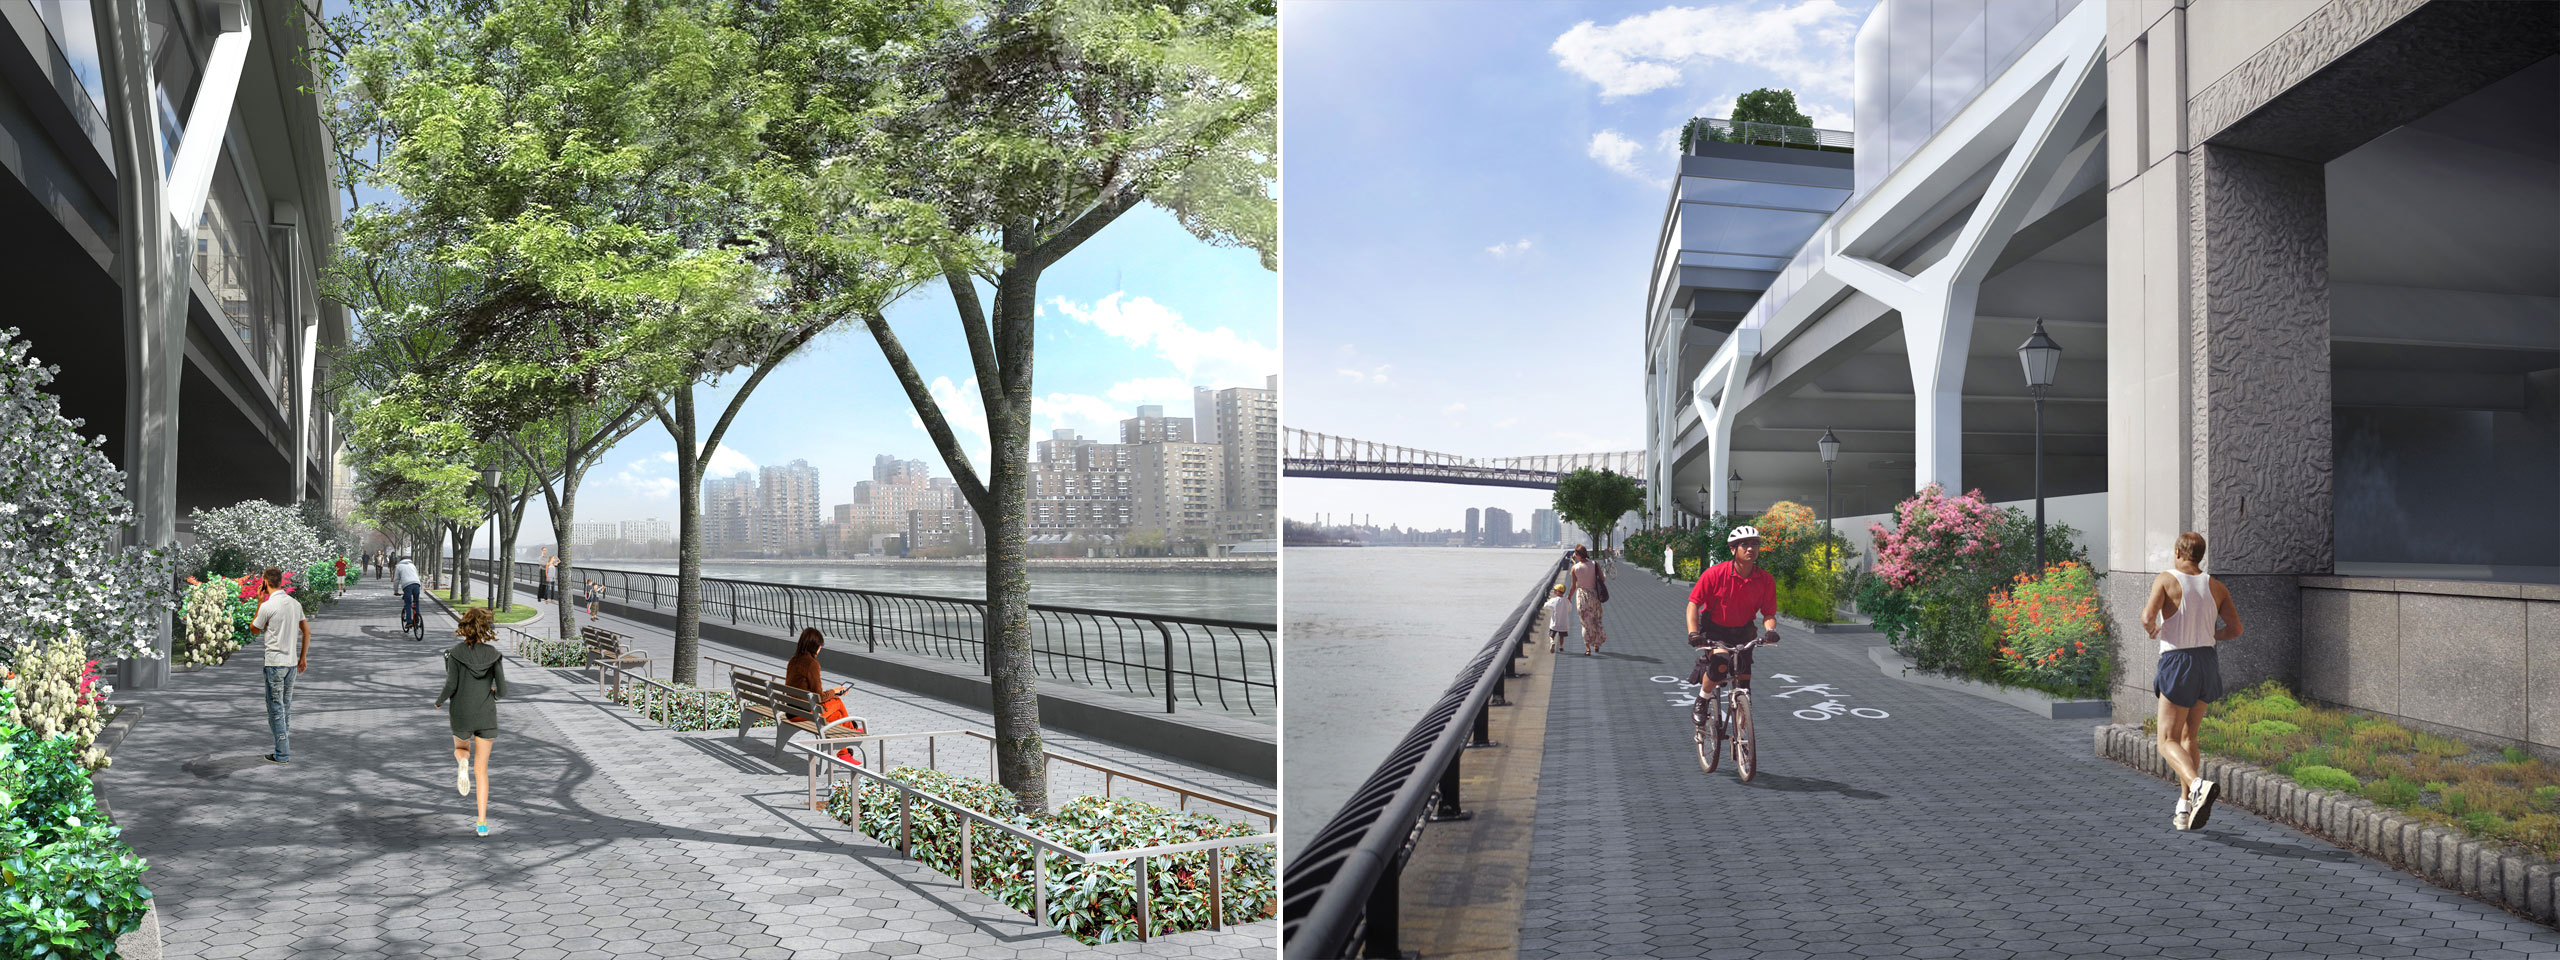 Renderings of the East River Esplanade, facing north and south, following the expansion of Rockefeller University. Credit: Rockefeller University.